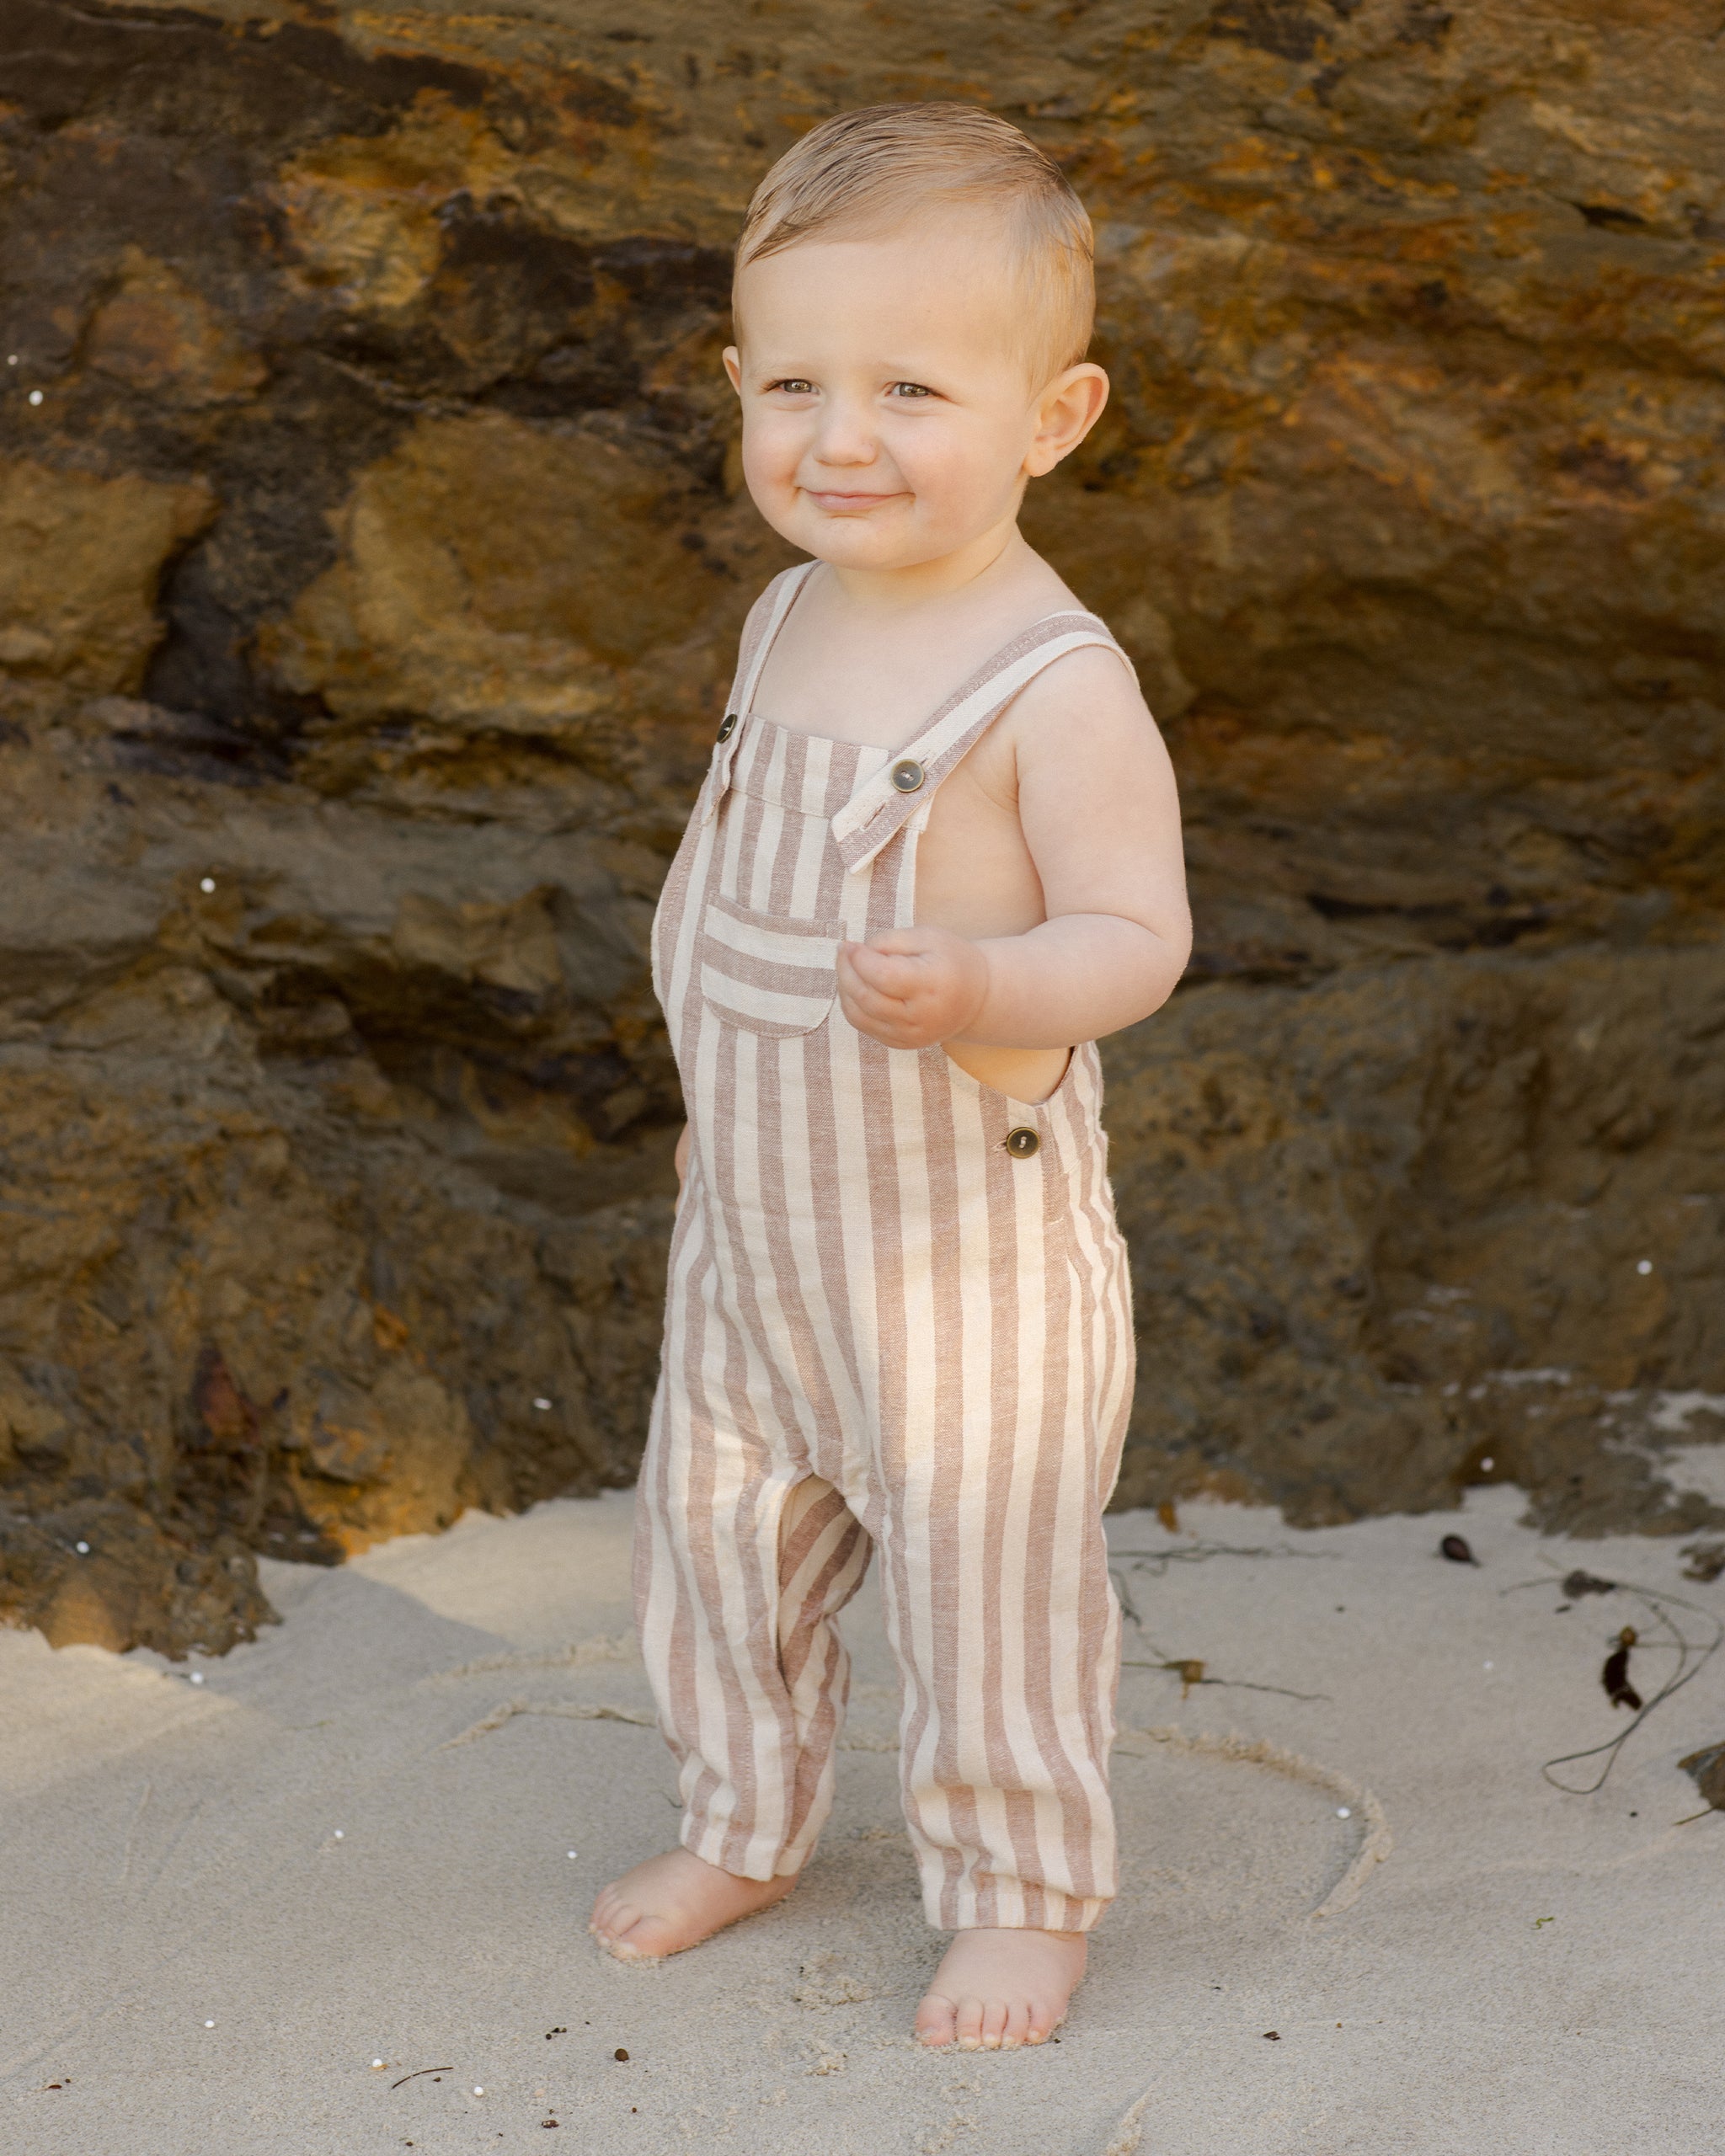 Baby Overall || Clay Stripe - Rylee + Cru | Kids Clothes | Trendy Baby Clothes | Modern Infant Outfits |